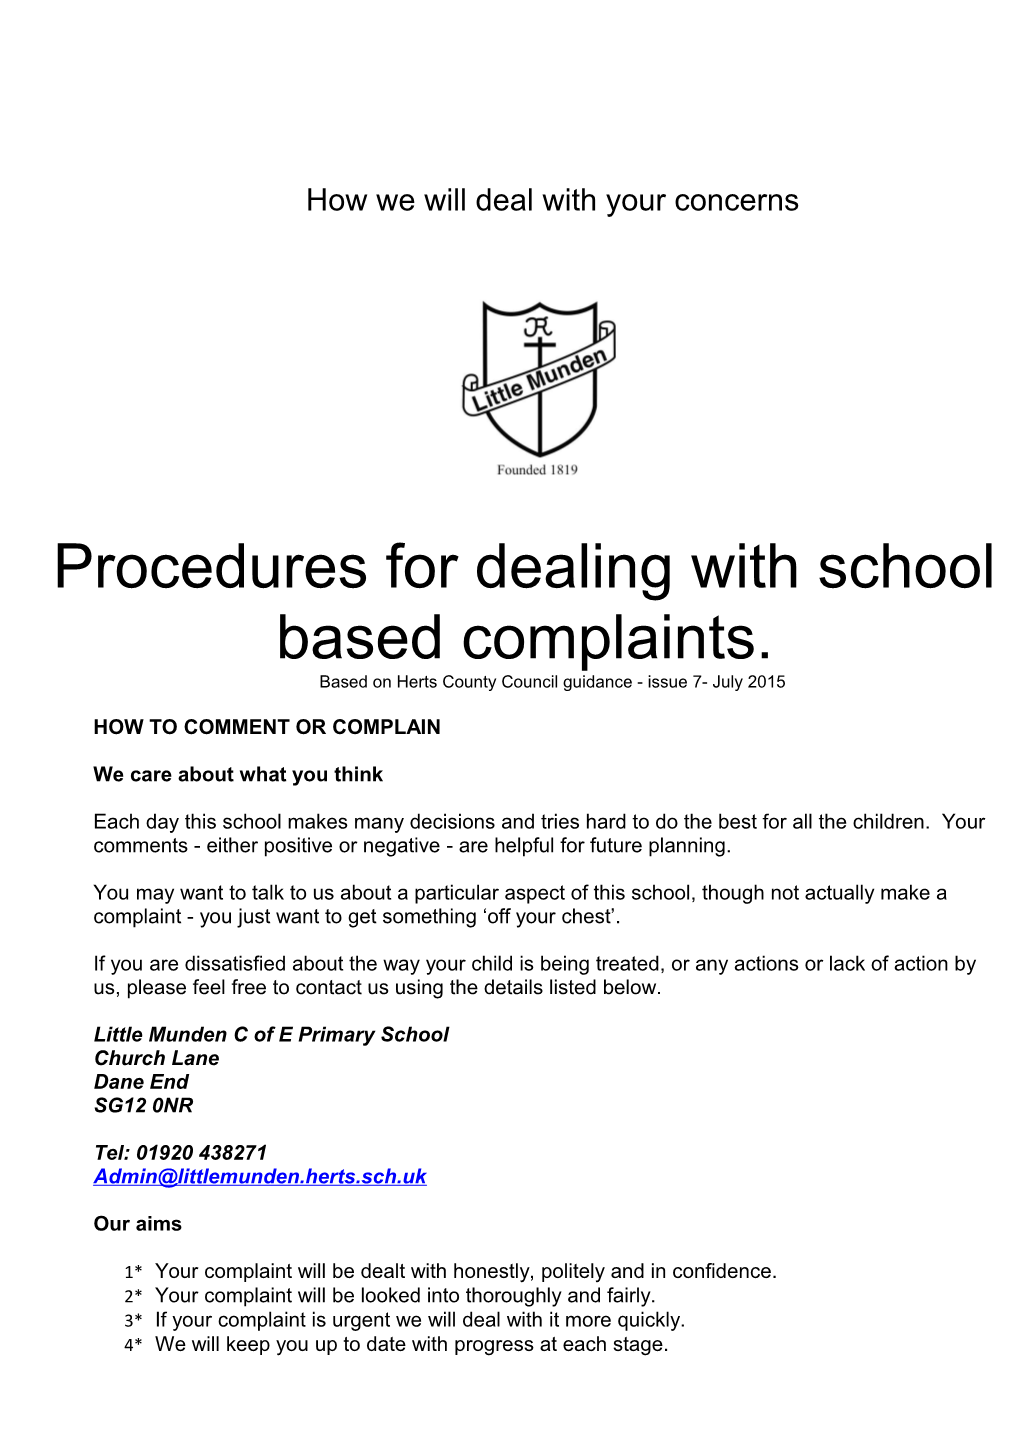 Procedures for Dealing with School Based Complaints